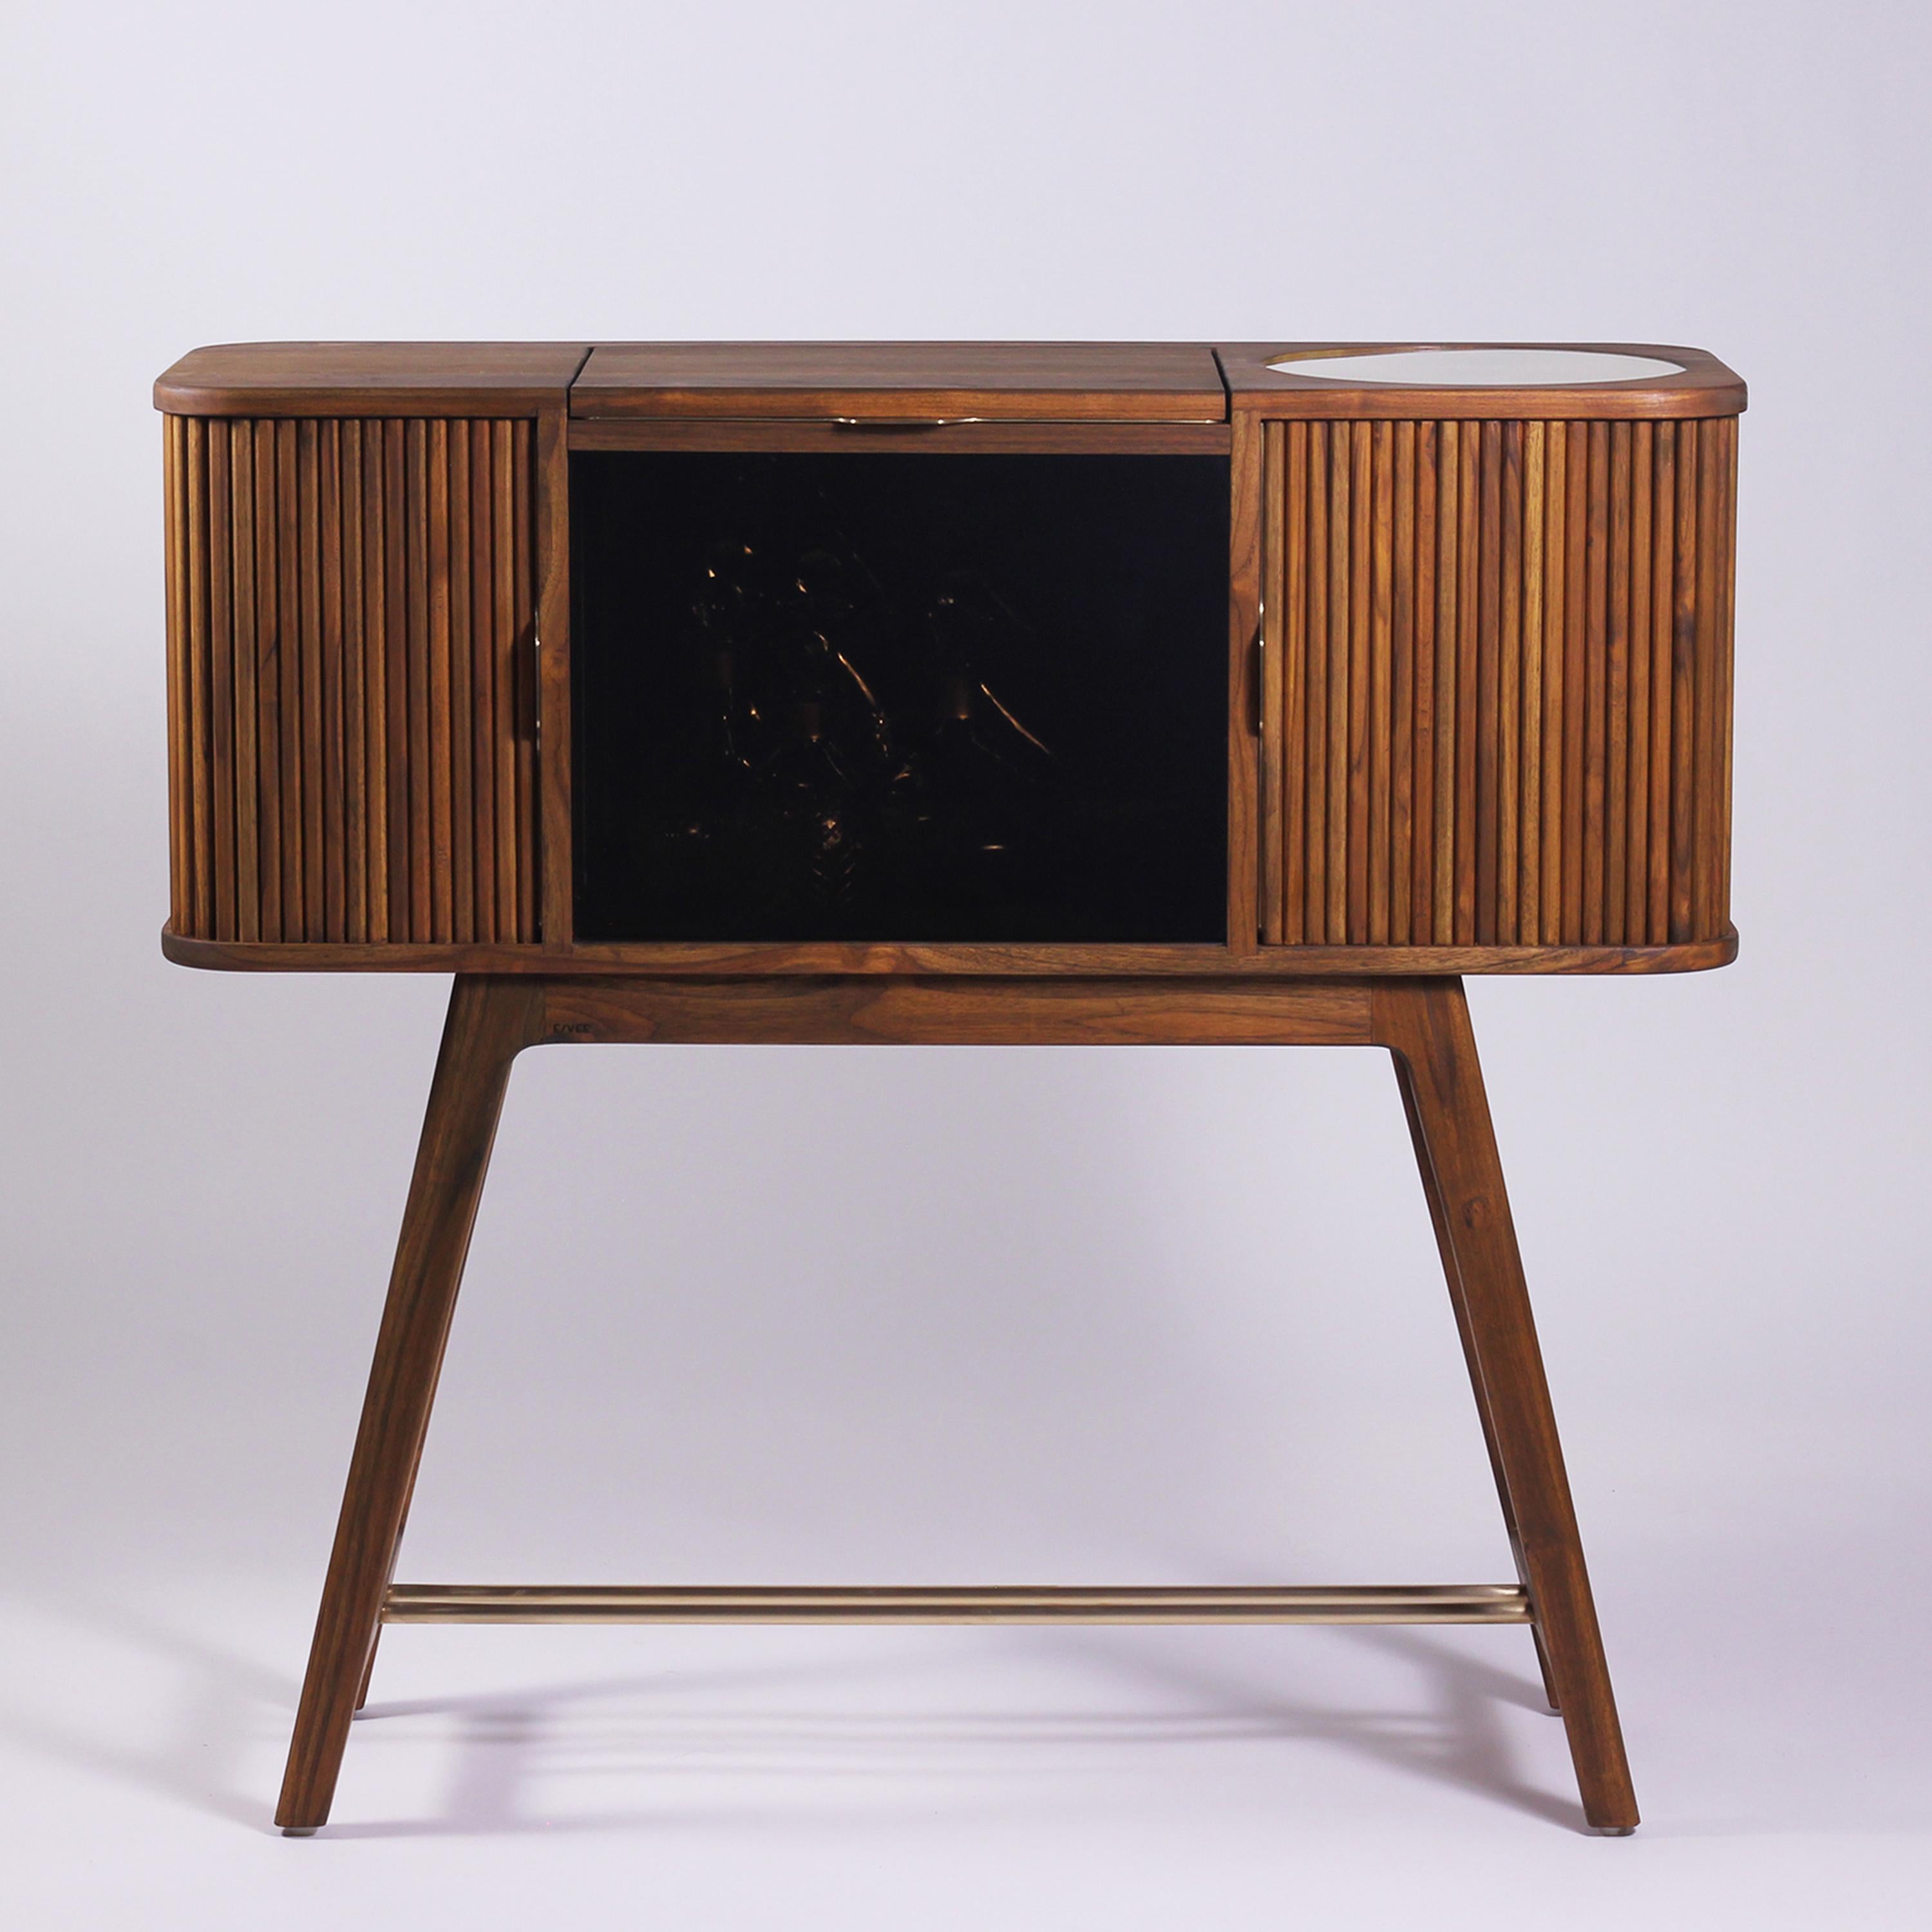 The Casanova teak wood bar cabinet with tambour doors is an original design, developed through an insight-led design process, to inspire a conscious lifestyle and promote mindful entertainment rituals. The design has a nostalgic retro form and is